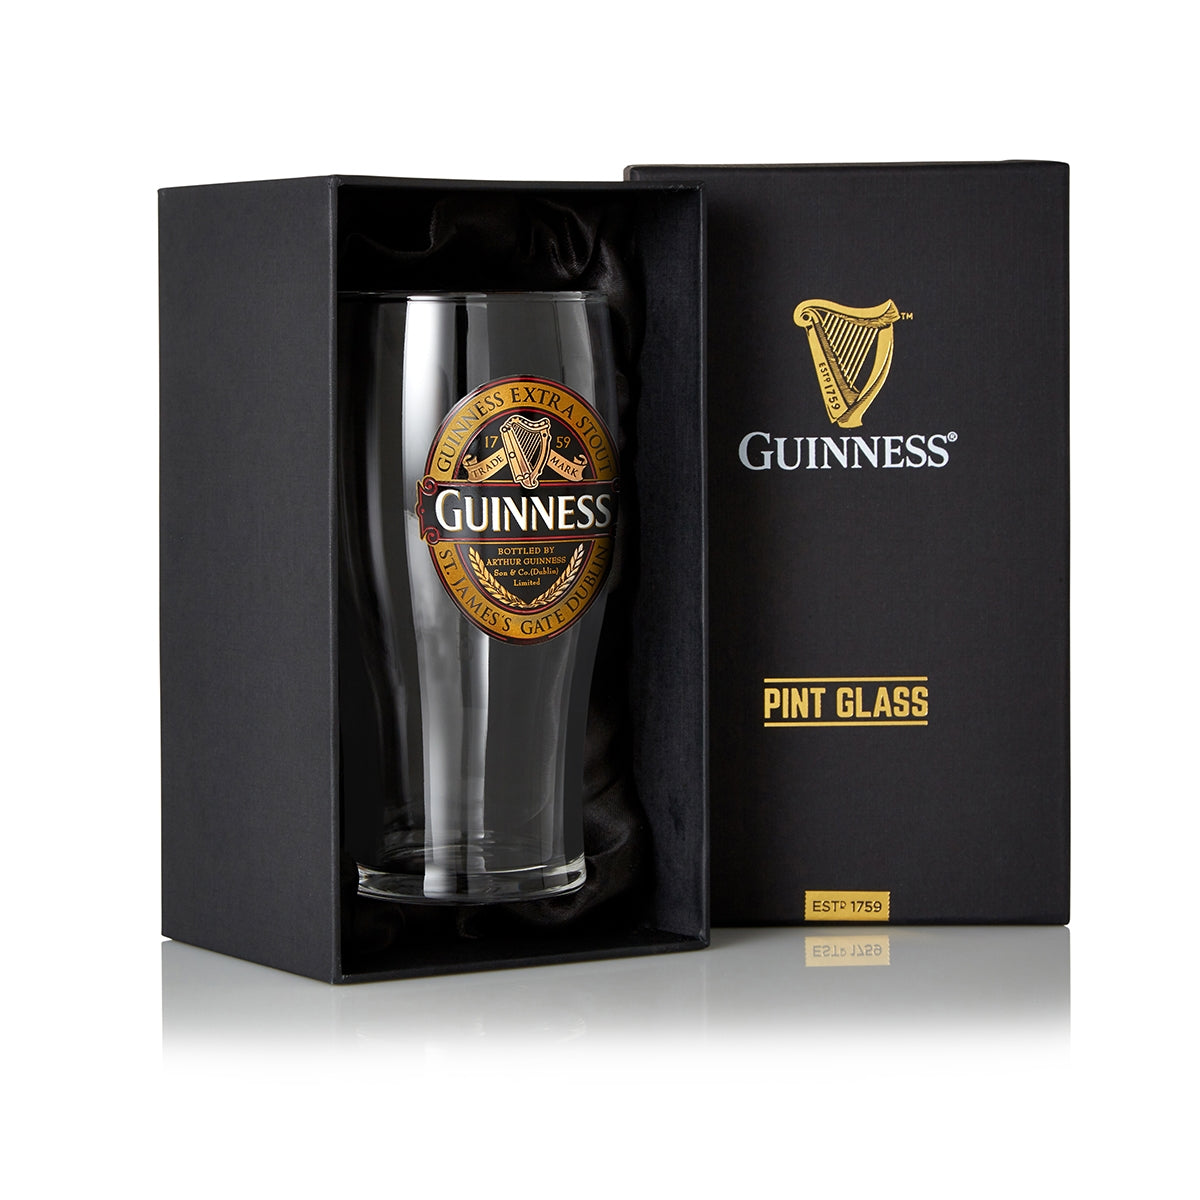 Guinness UK Guinness Classic Collection Pint Glass in a box.